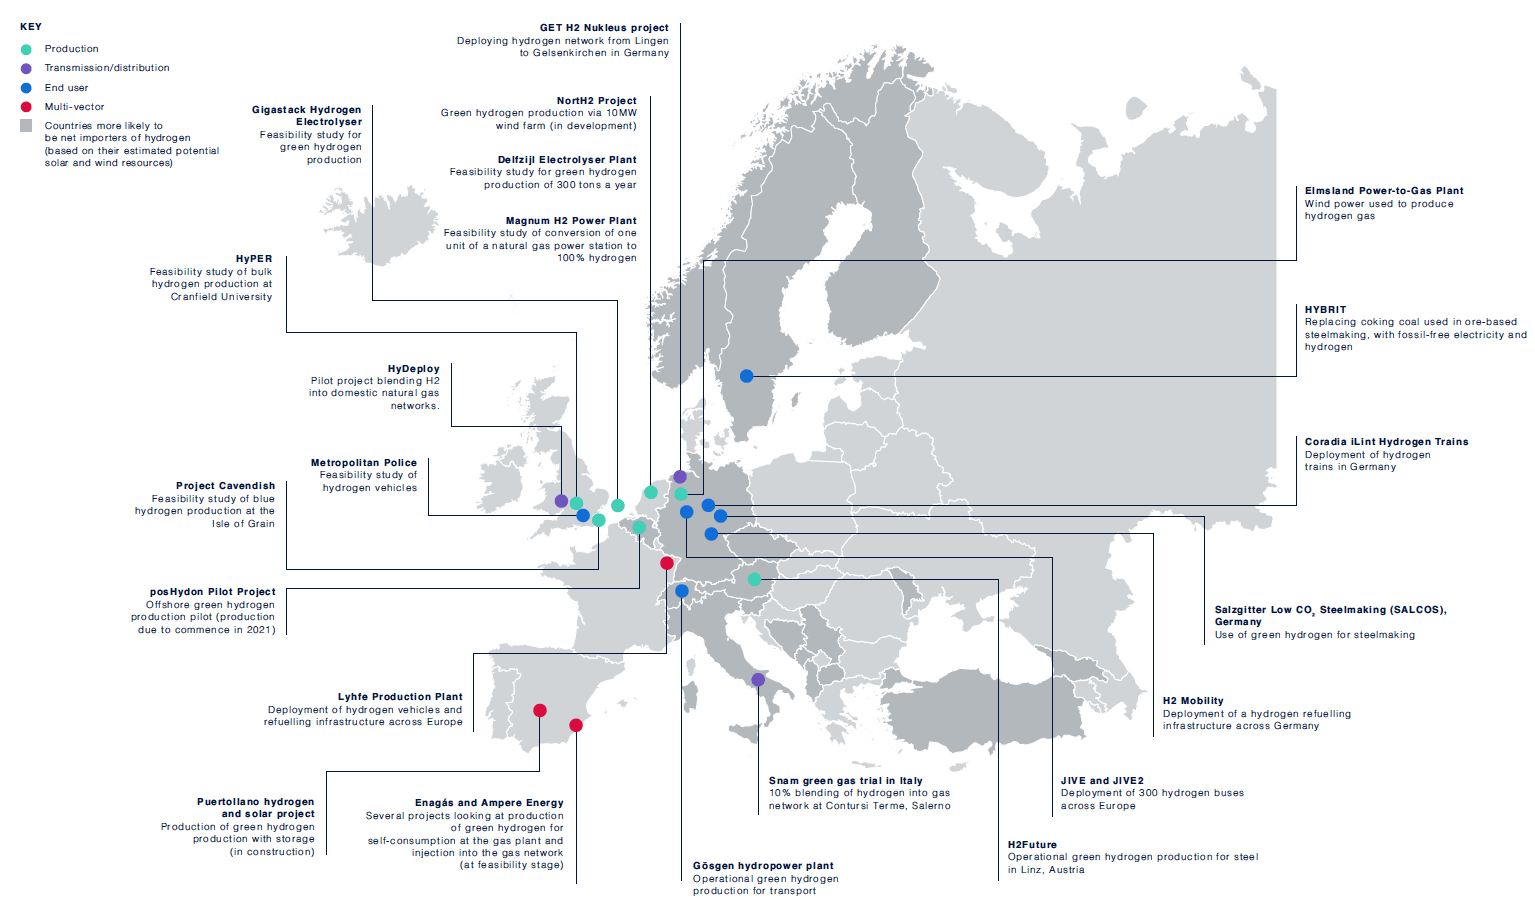 Examples of hydrogen projects in Europe 24 
This figure shows a summary of some of the hydrogen projects that are being developed in Europe. Four different categories have been established for these projects. These are ‘production’, ‘transmission/distribution’, ‘end user’ and ‘multi-vector’. The image also identifies the European countries more likely to be net importers of hydrogen. Some of the projects portrayed include Snam Green Gas trial in Italy, the Puertollano hydrogen and solar project in Spain and the GET H2 Nukleus project in Germany.